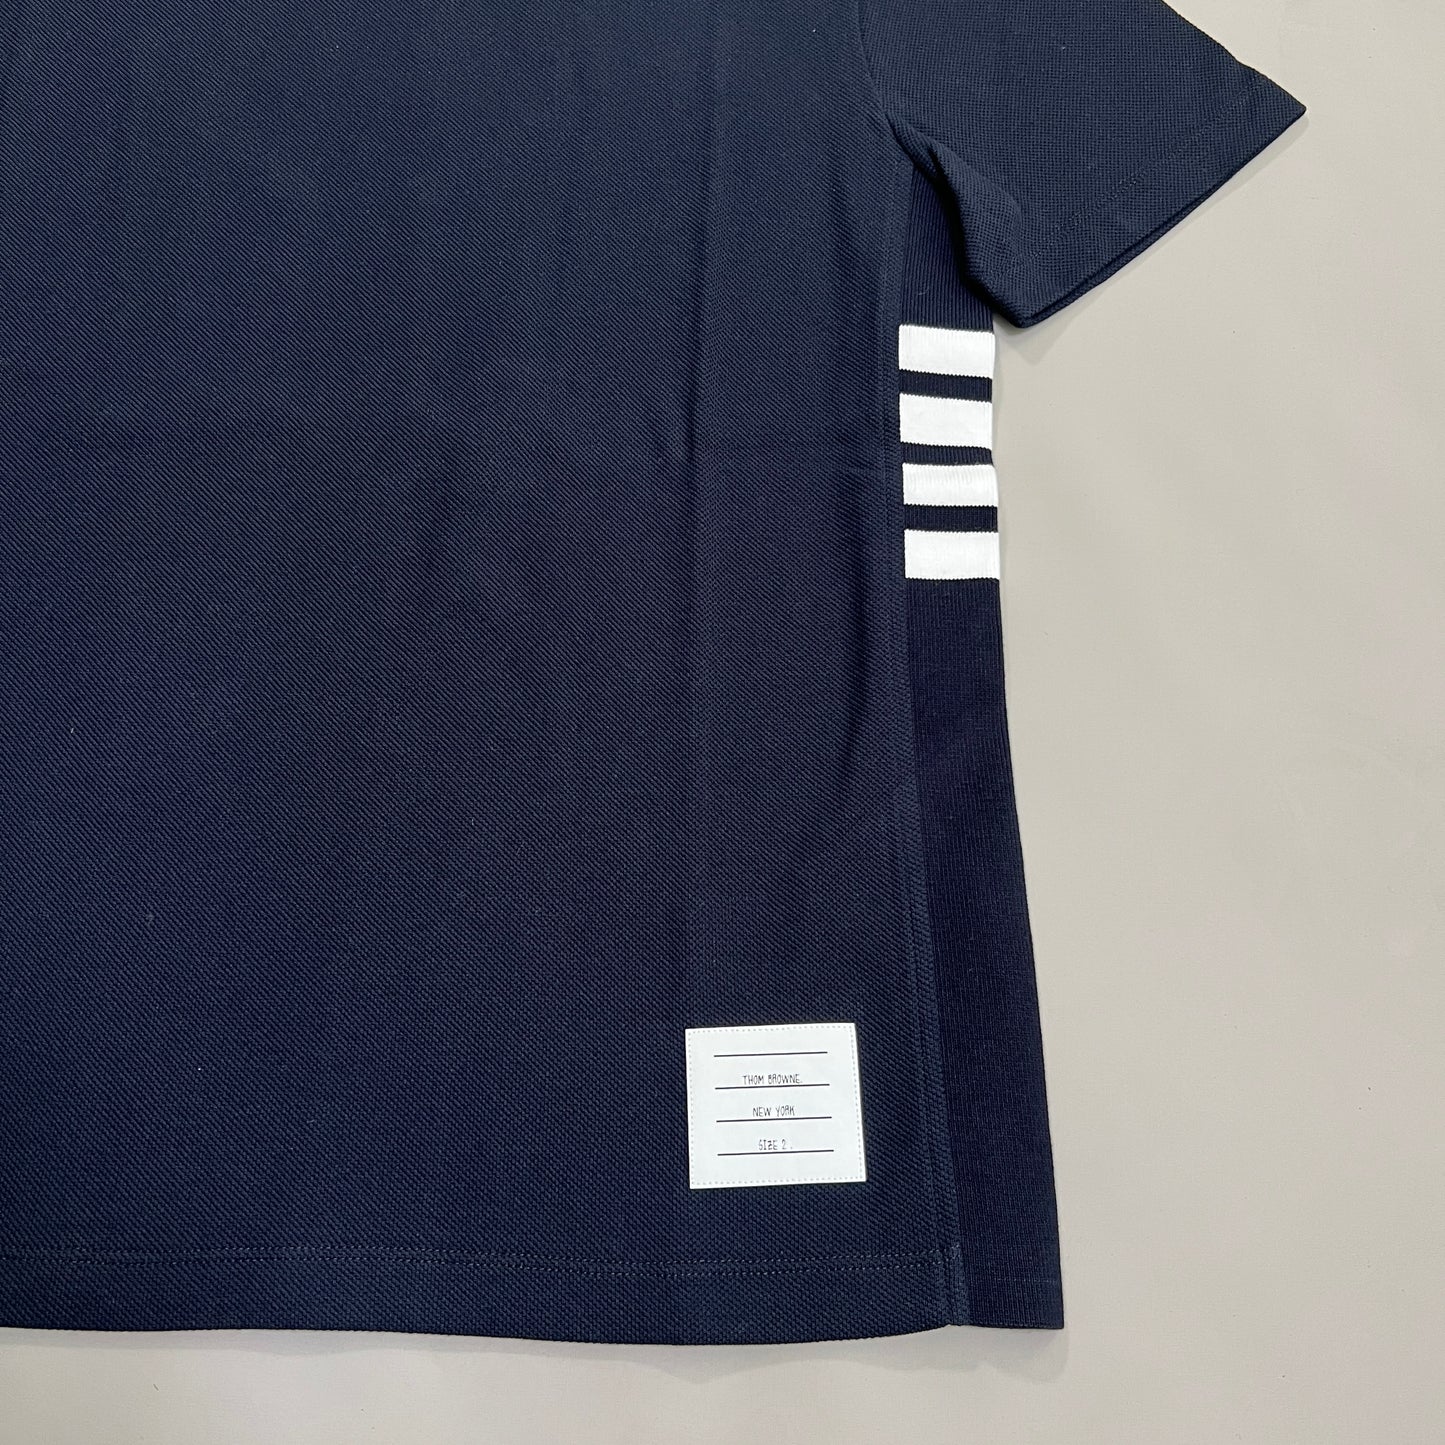 THOM BROWNE Short Sleeve Tee w/engineered 4Bar Stripe in Classic Pique Navy Size 2 (New)